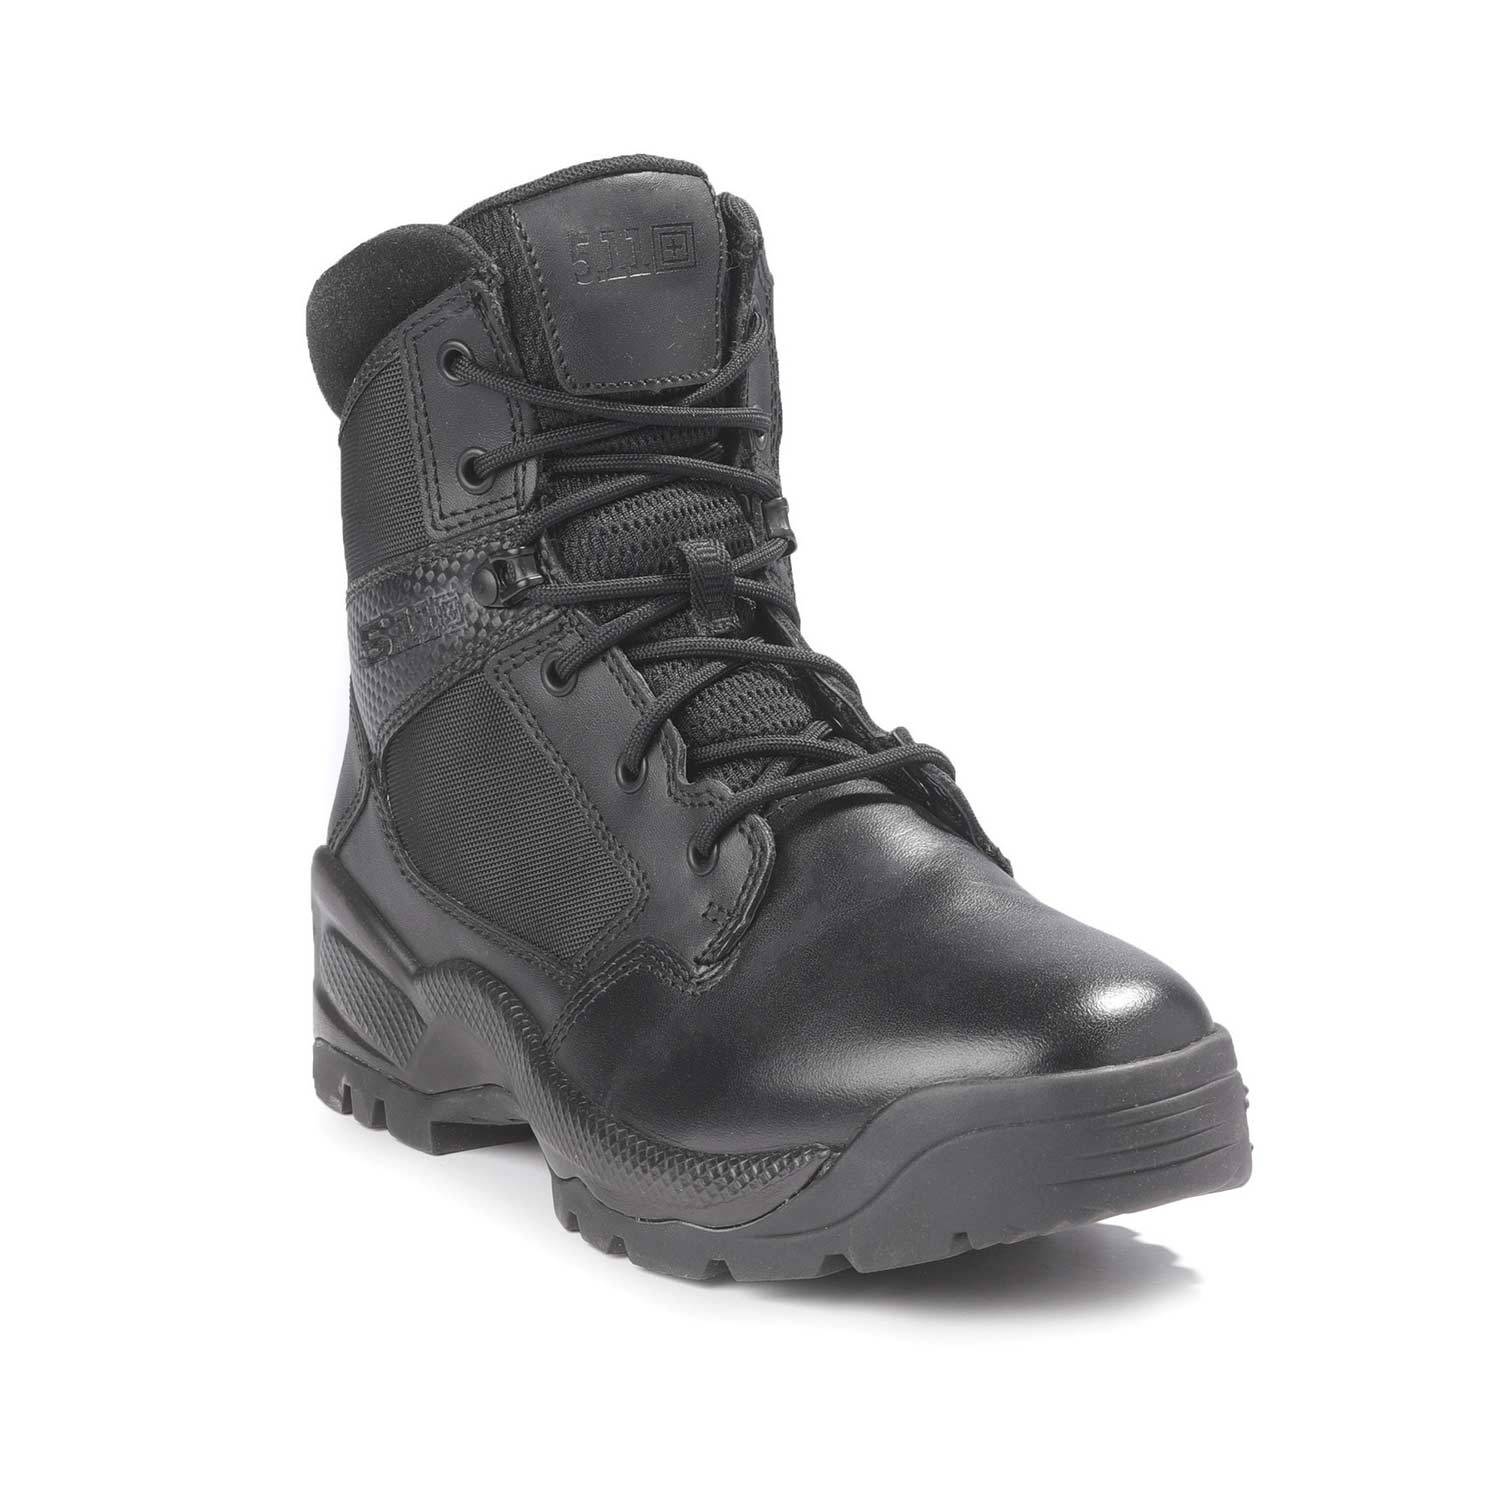 A.T.A.C.® 2.0 8 Side Zip Boot